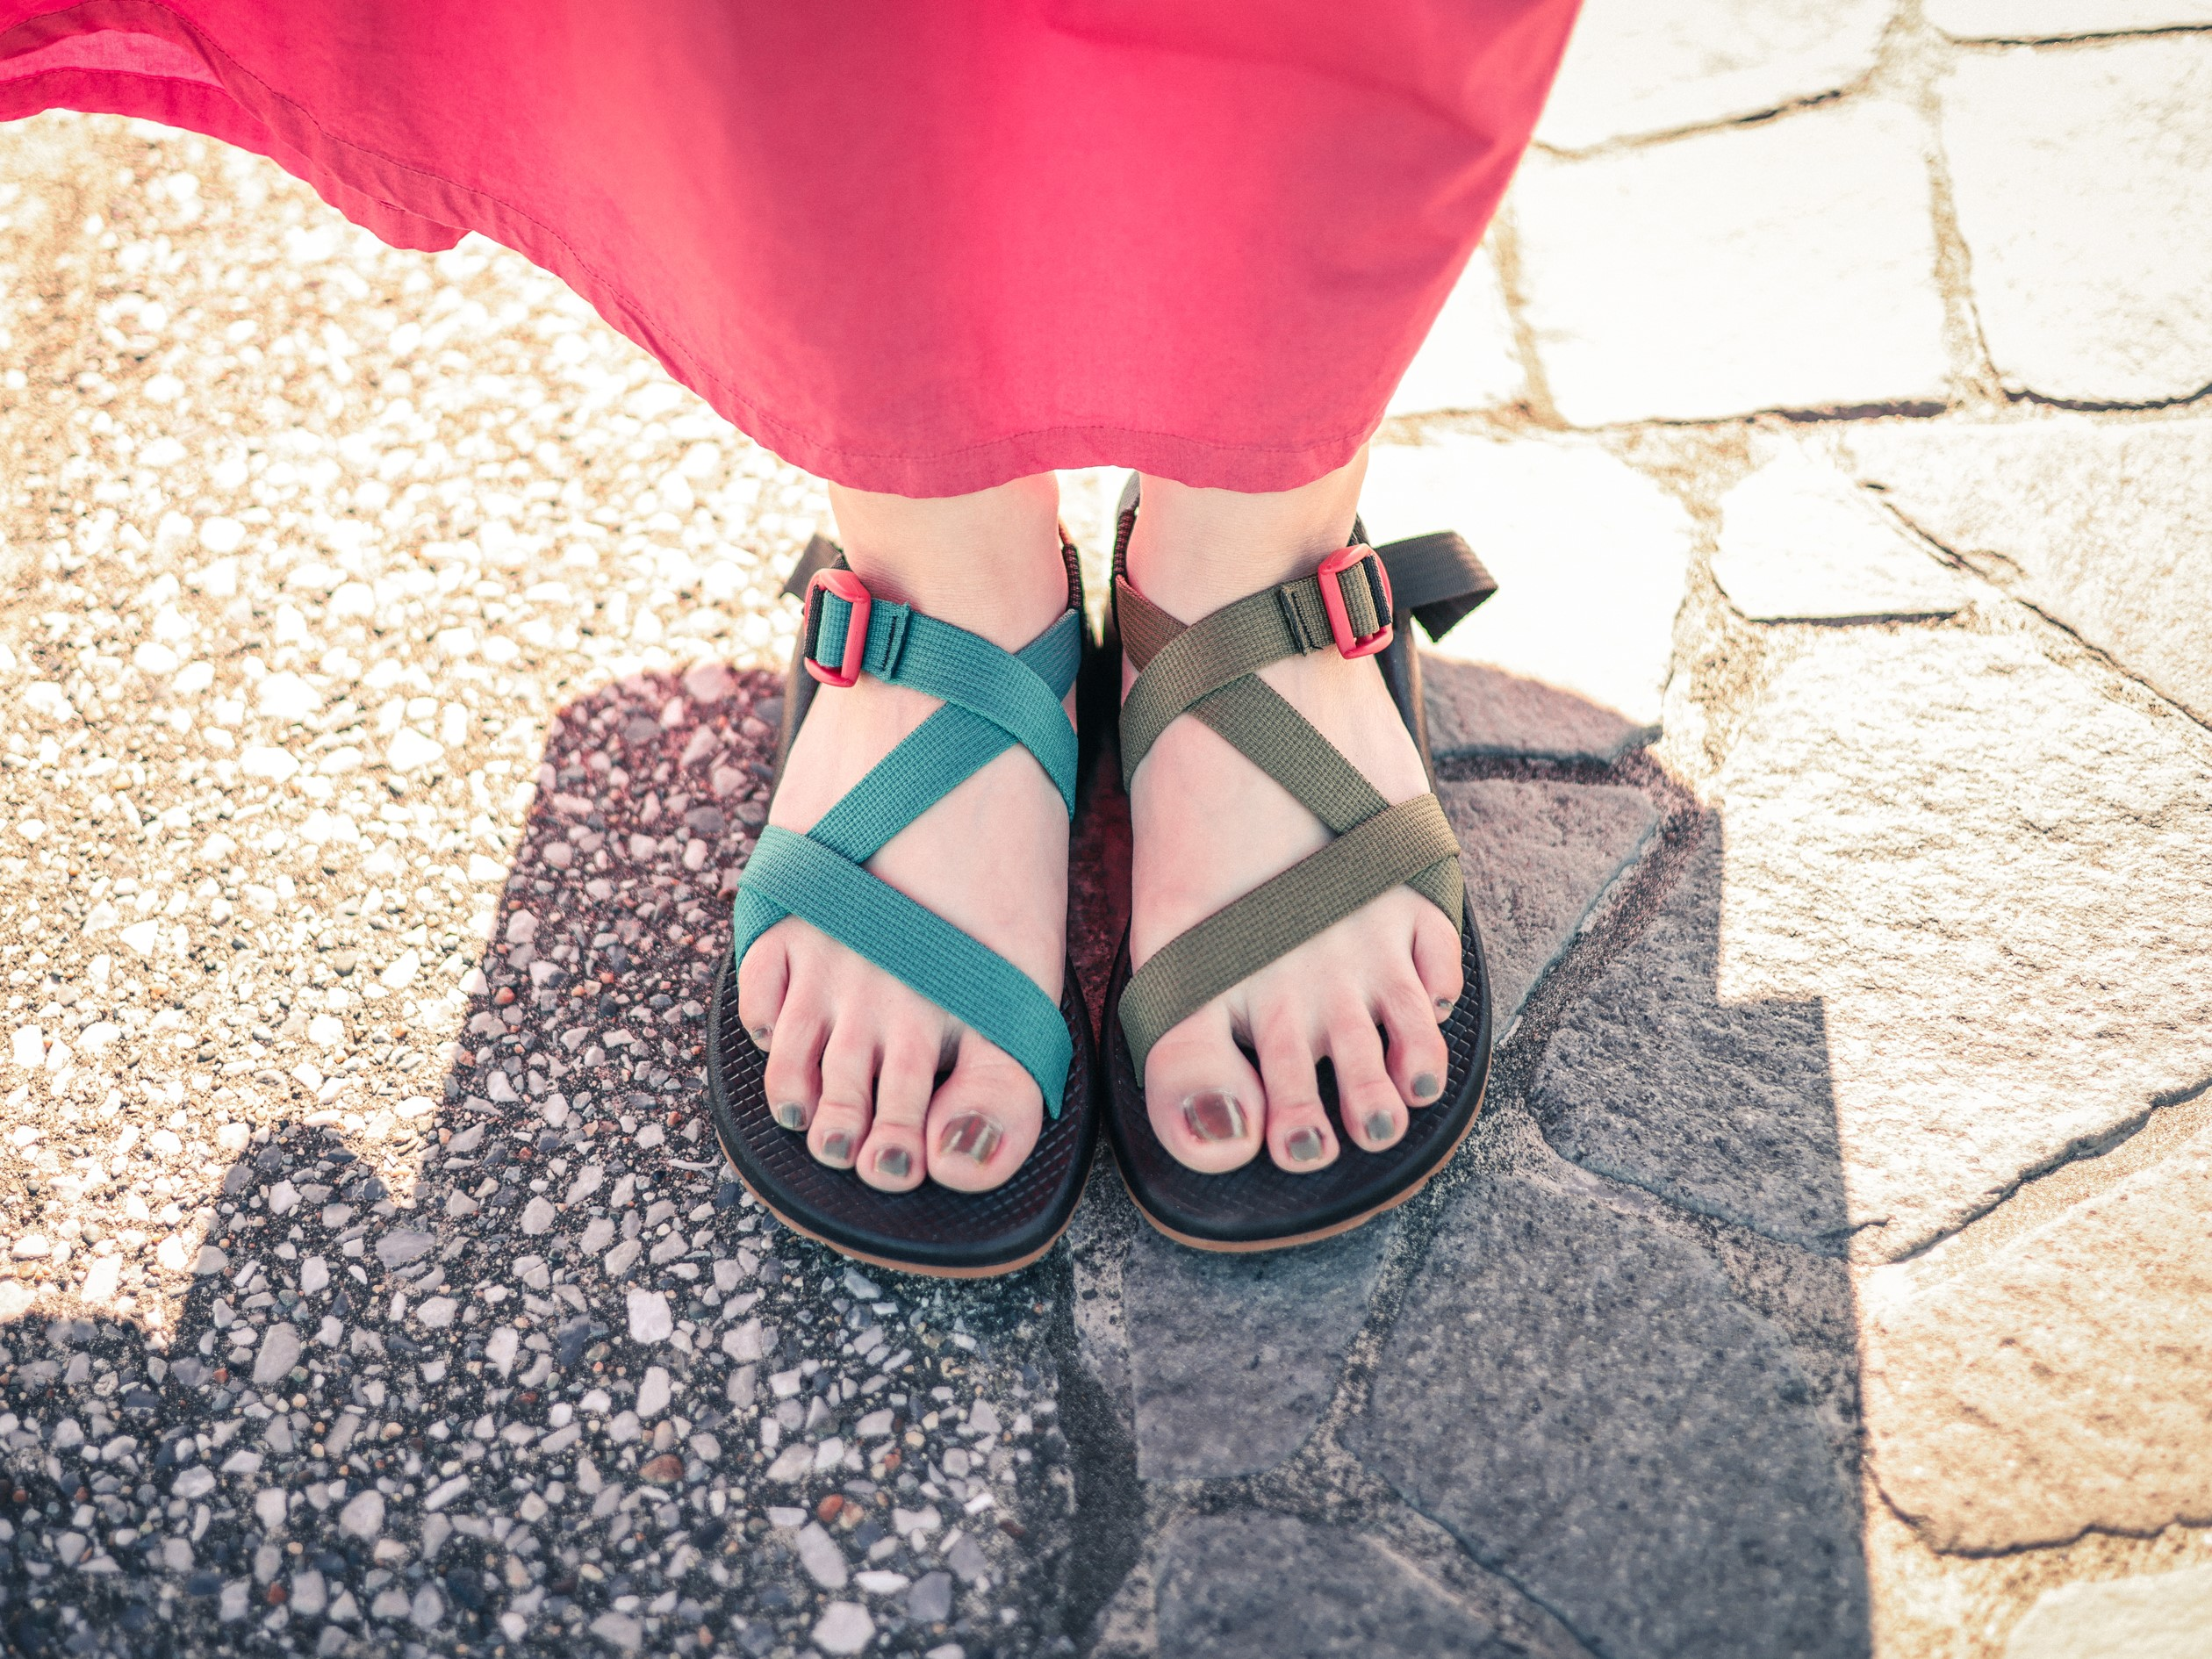 A&F COUNTRYのChaco Z1 クラシック